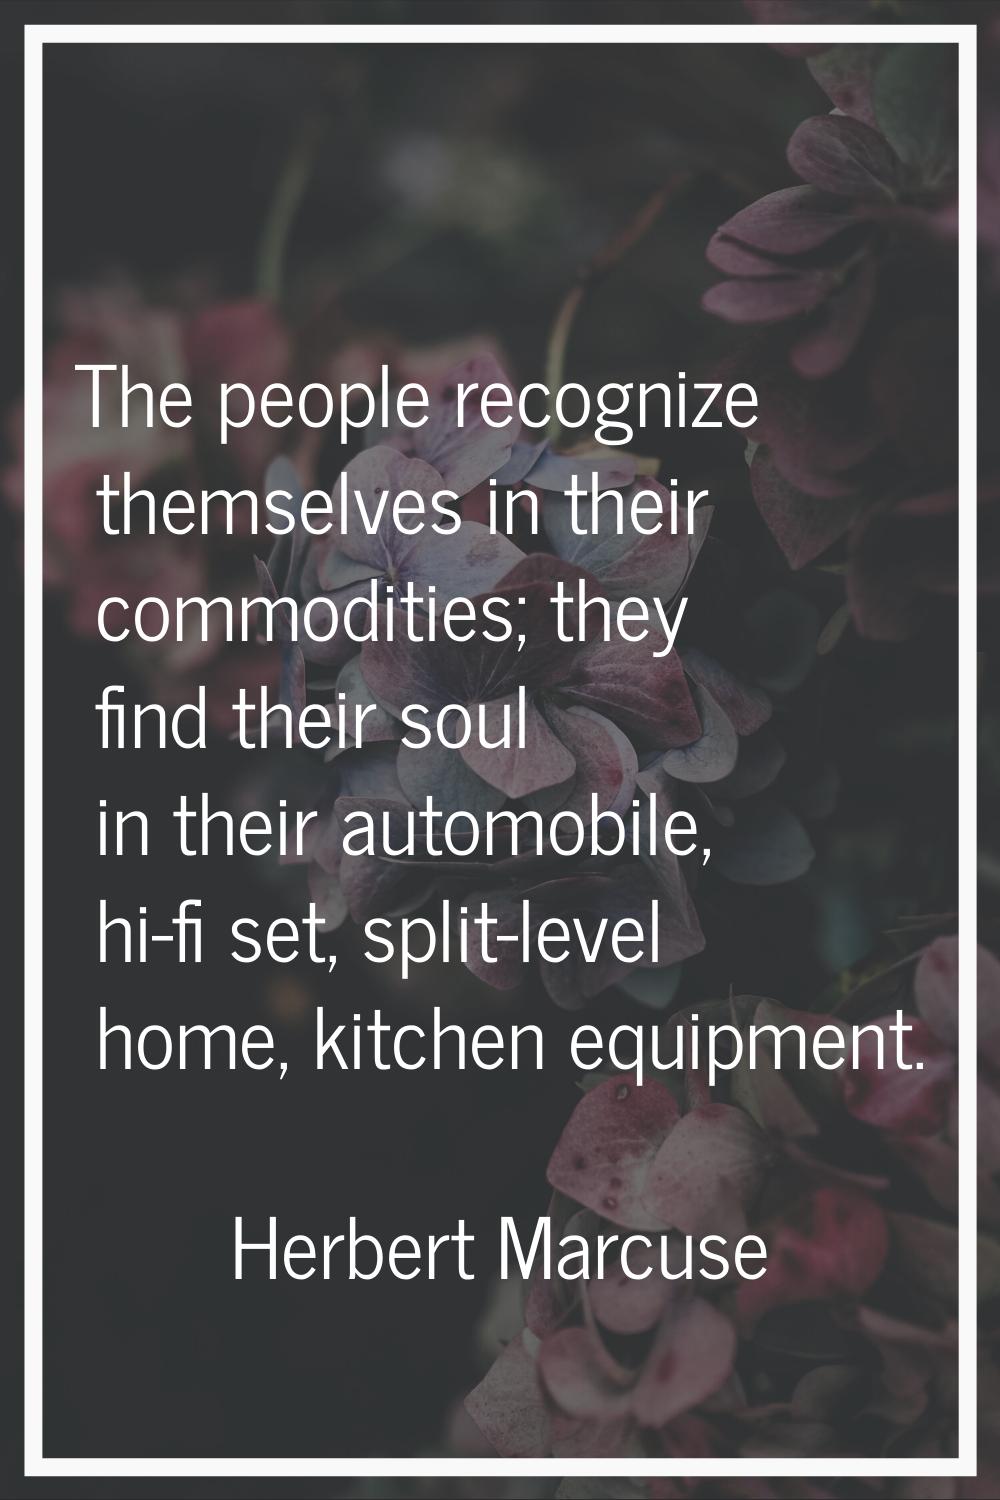 The people recognize themselves in their commodities; they find their soul in their automobile, hi-